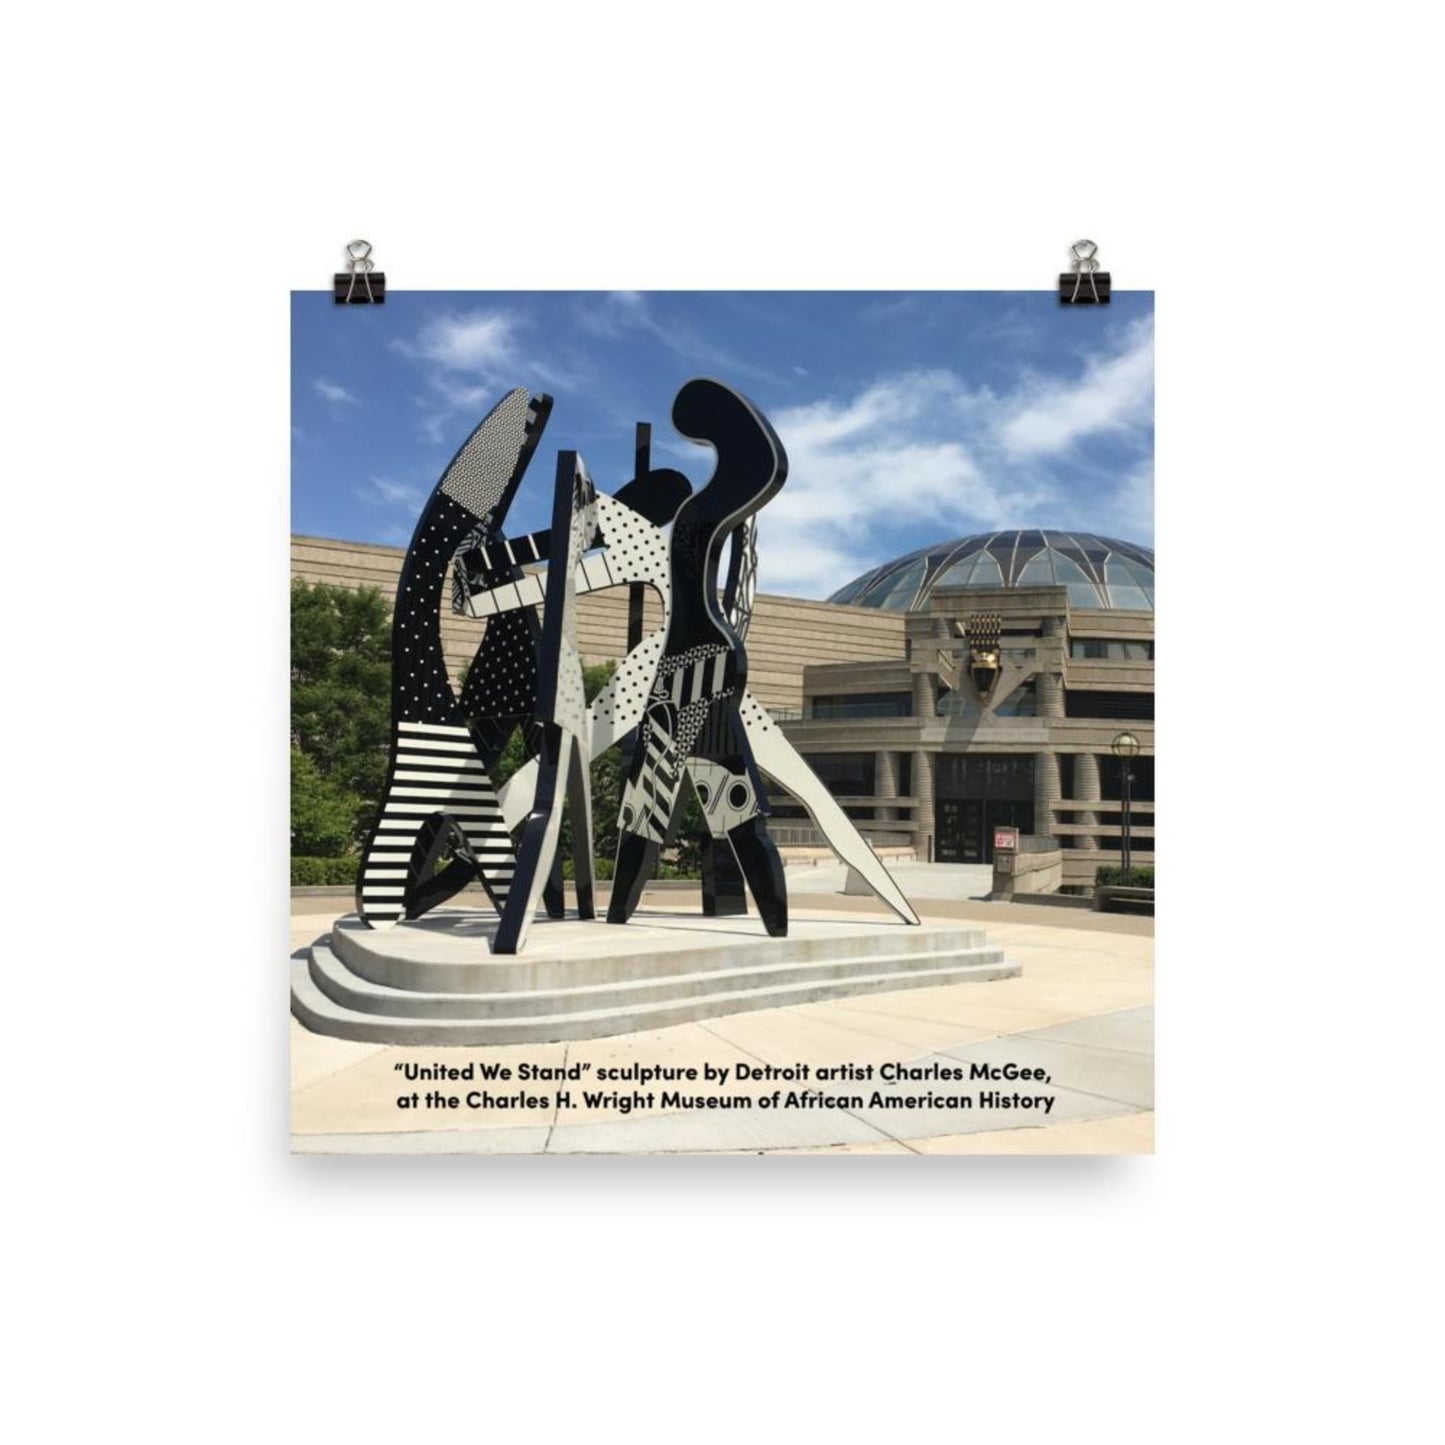 10 inch by 10 inch poster with United We Stand sculpture in front of Charles H. Wright Museum of African American History